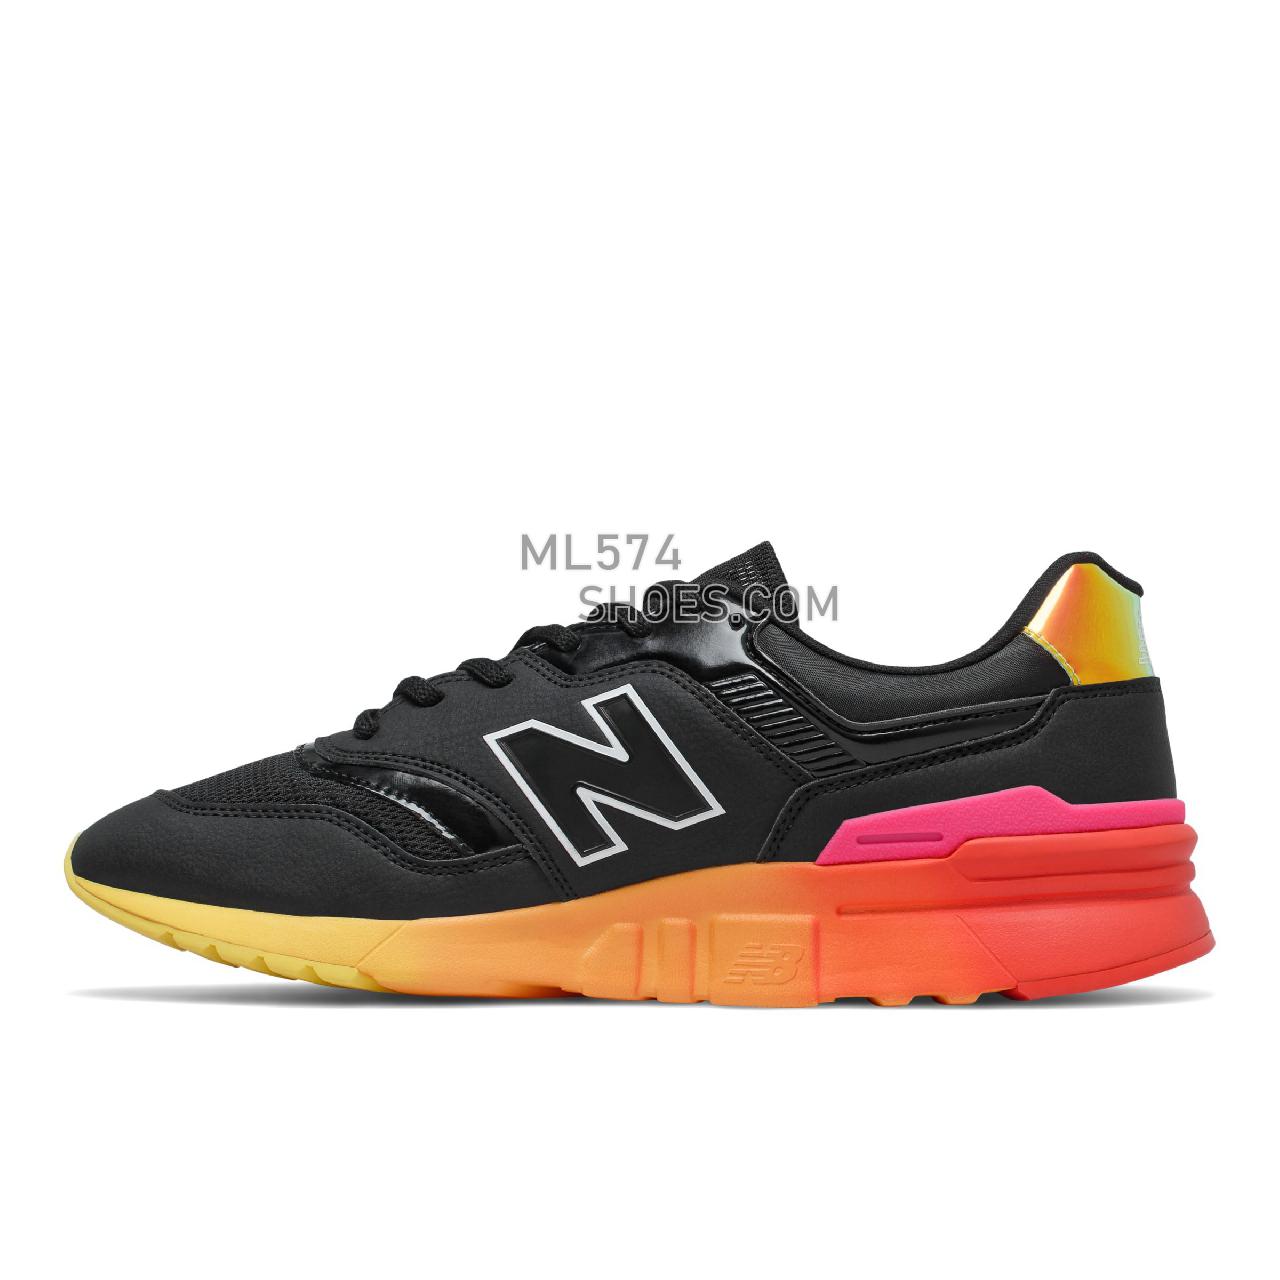 New Balance 997H - Men's Classic Sneakers - Black with Ghost Pepper - CM997HUP